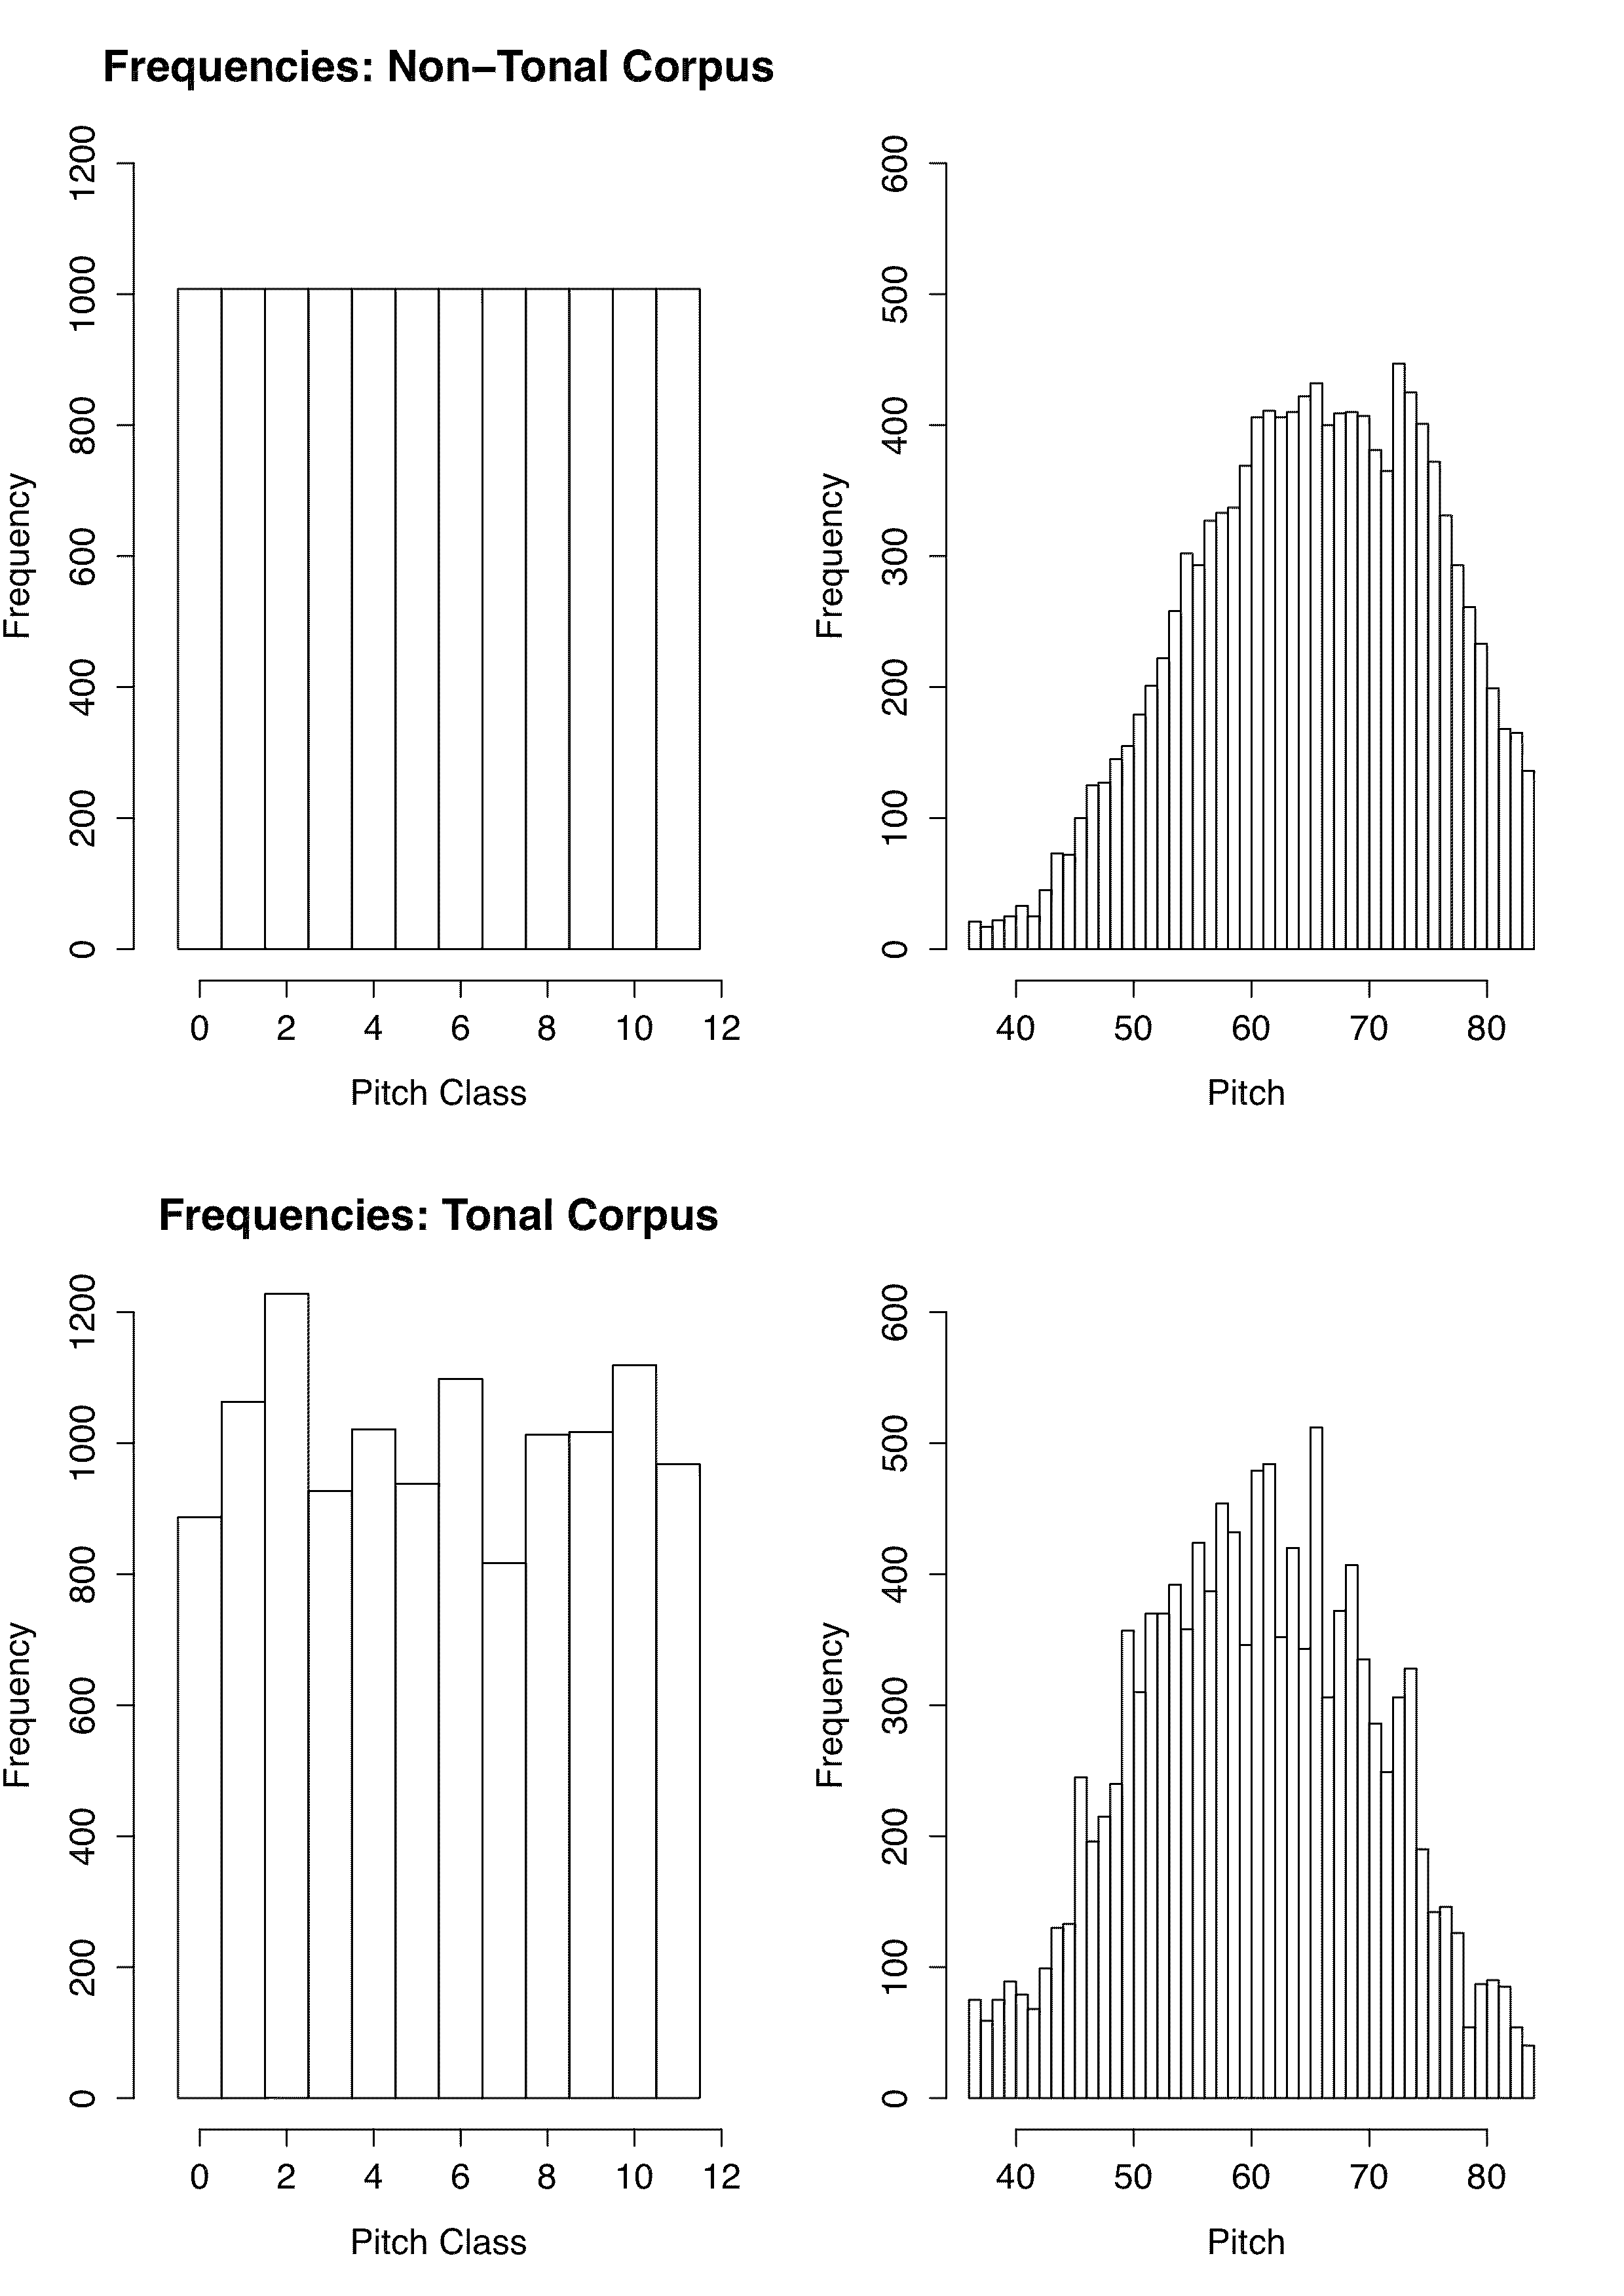 Image containing four bar graphs showing non-tonal corpus pitch class, non-tonal corpus pitch, tonal corpus pitch class, and tonal corpus pitch